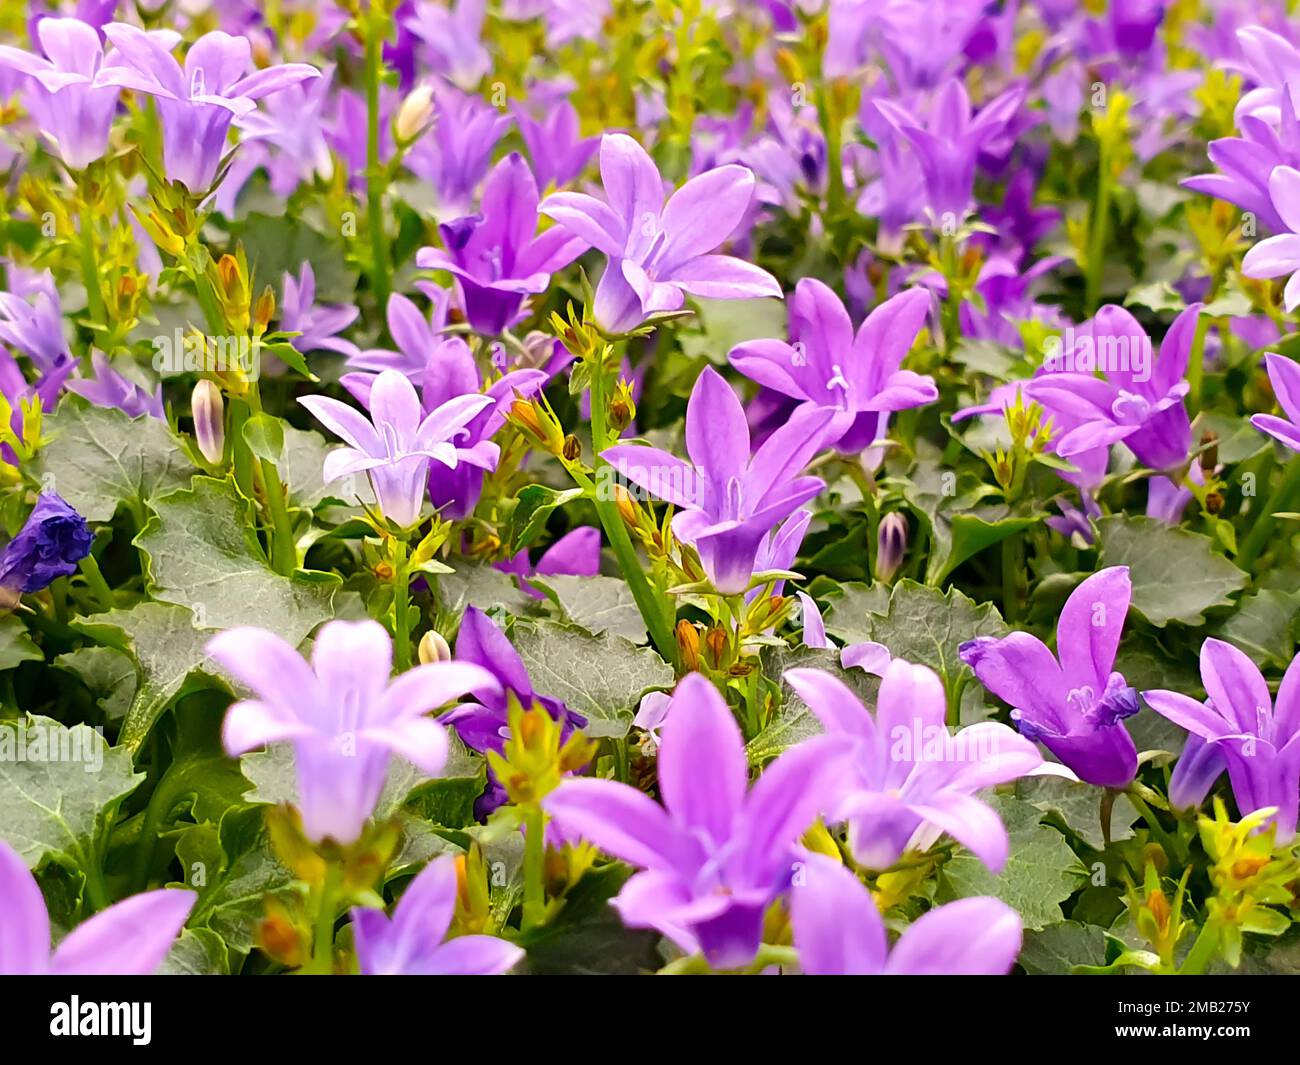 campanula portenschlagiana, background. Close up of purple flowers of the wall or Dalmatian or Adria bellflower. Stock Photo